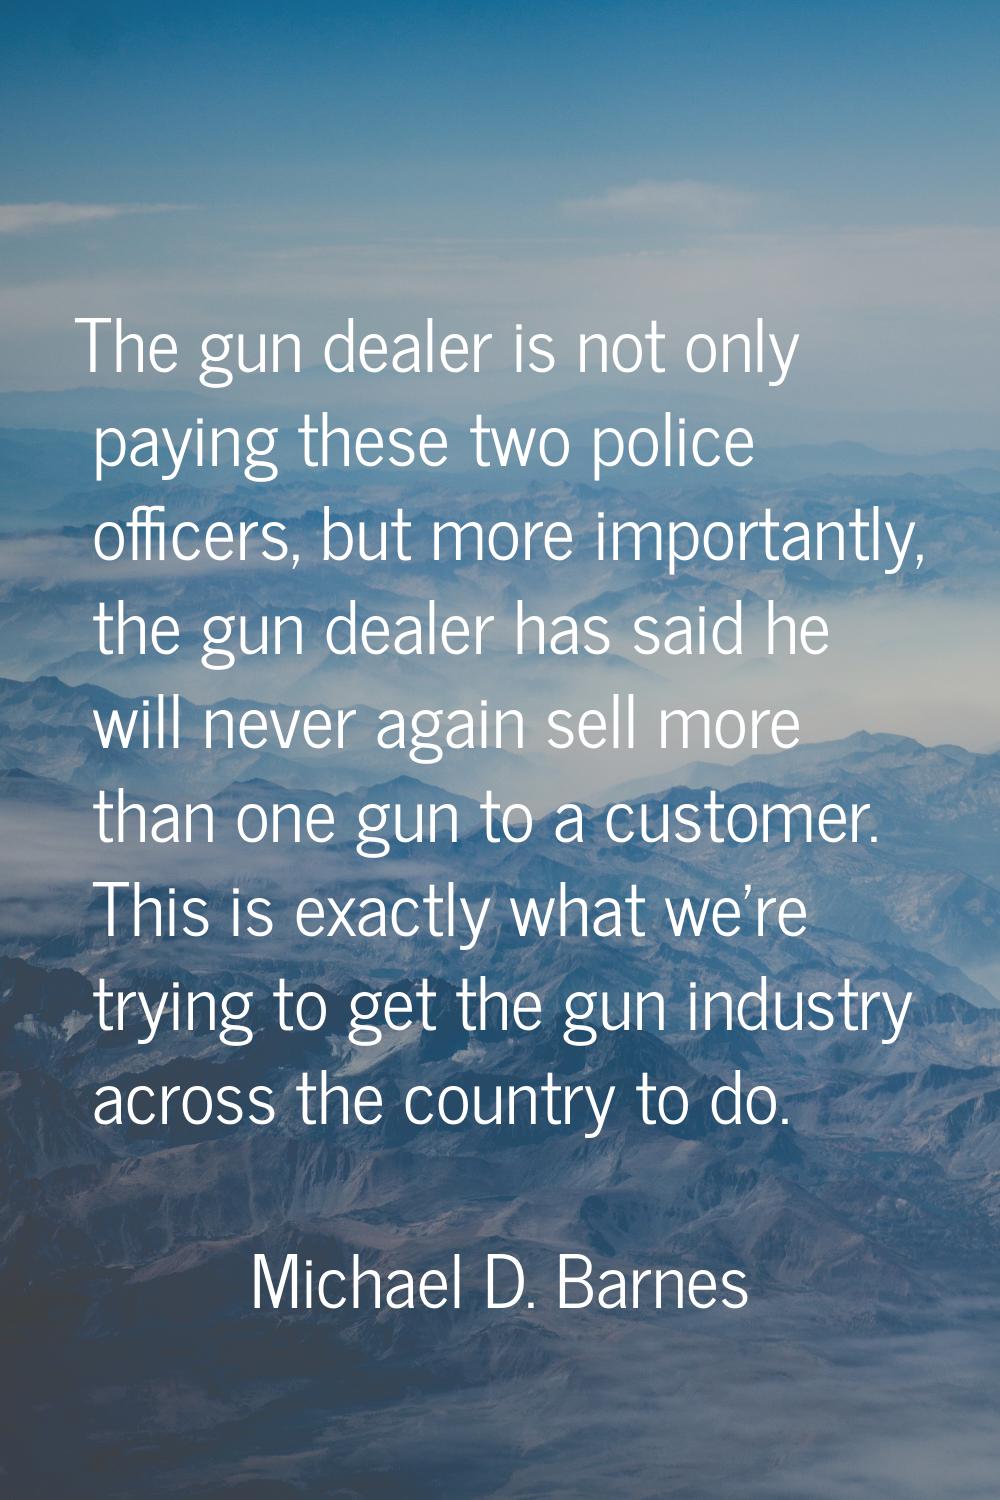 The gun dealer is not only paying these two police officers, but more importantly, the gun dealer h